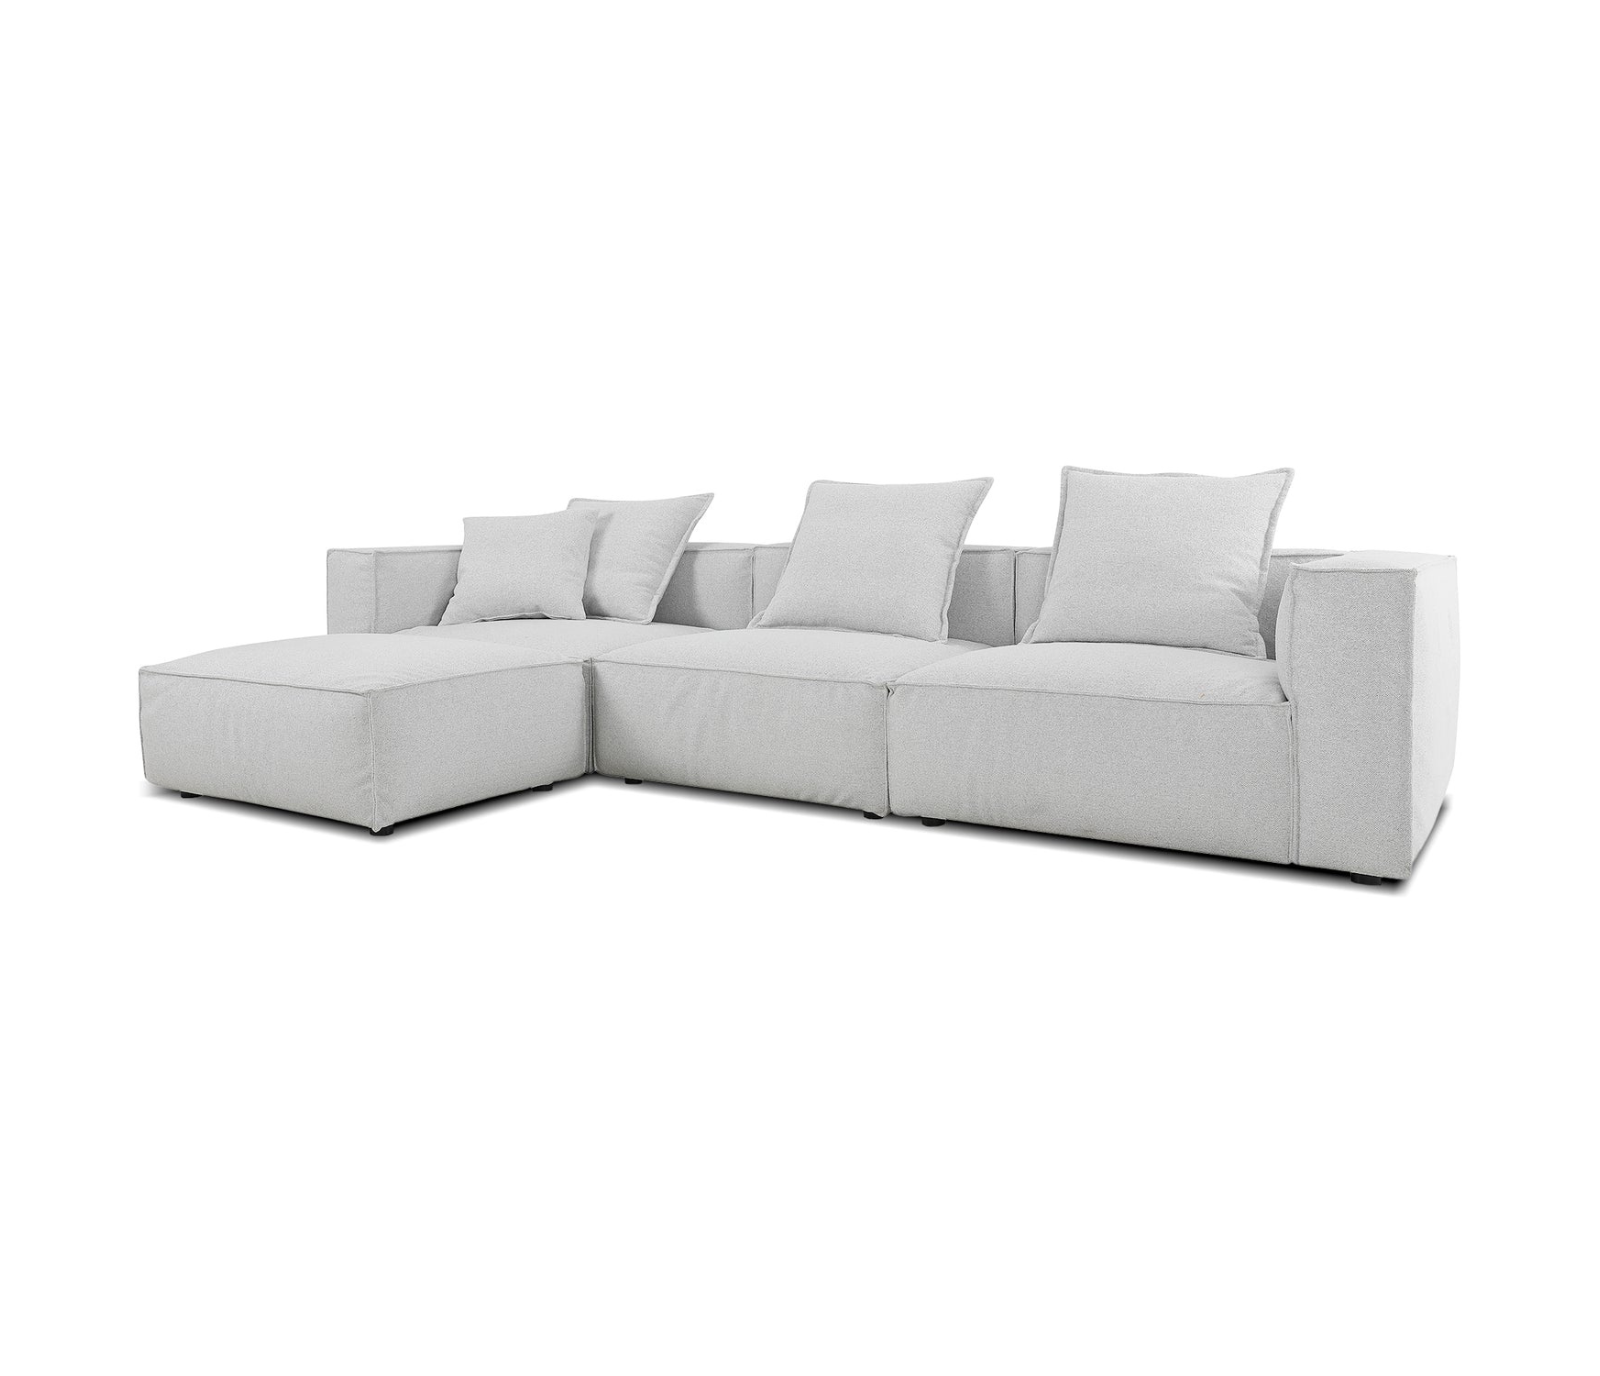 Malta 4 Piece Sectional - Clamshell Grey Fabric